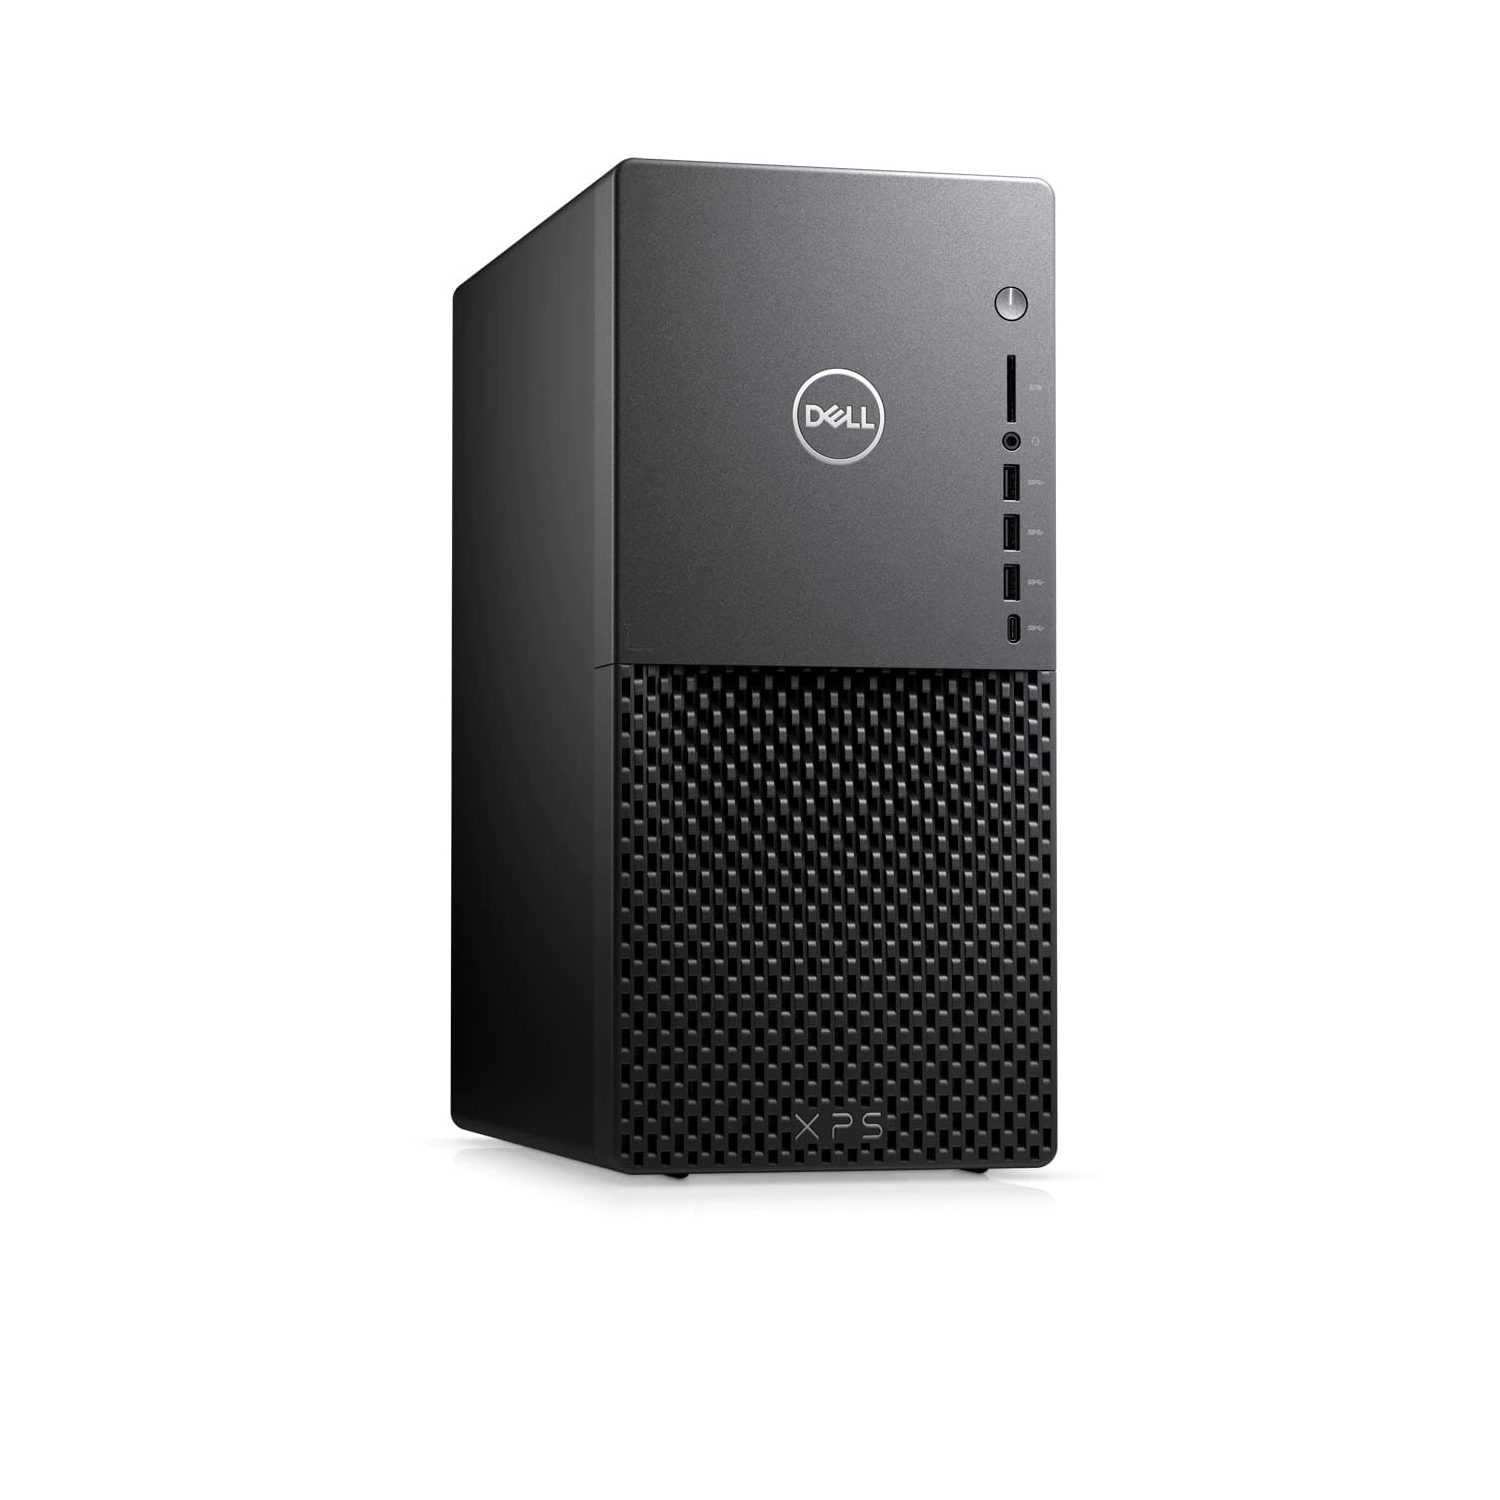 Refurbished (Excellent) - Dell XPS 8940 Desktop (2020) | Core i7 - 512GB SSD - 32GB RAM - RX 5700 | 8 Cores @ 4.9 GHz - 11th Gen CPU Certified Refurbished